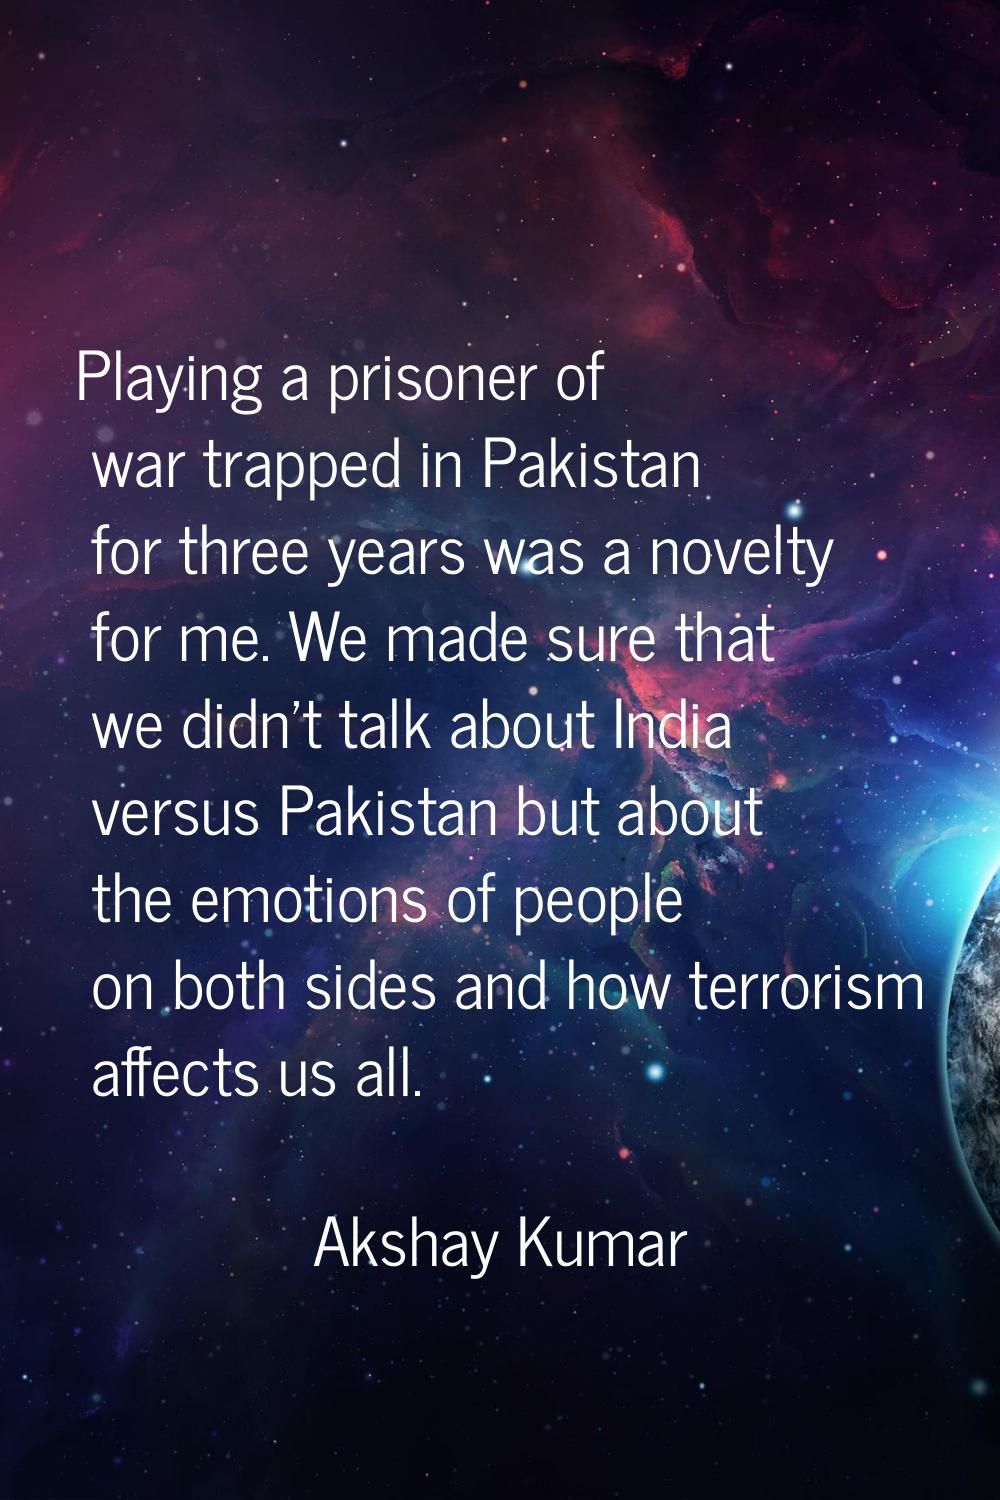 Playing a prisoner of war trapped in Pakistan for three years was a novelty for me. We made sure th